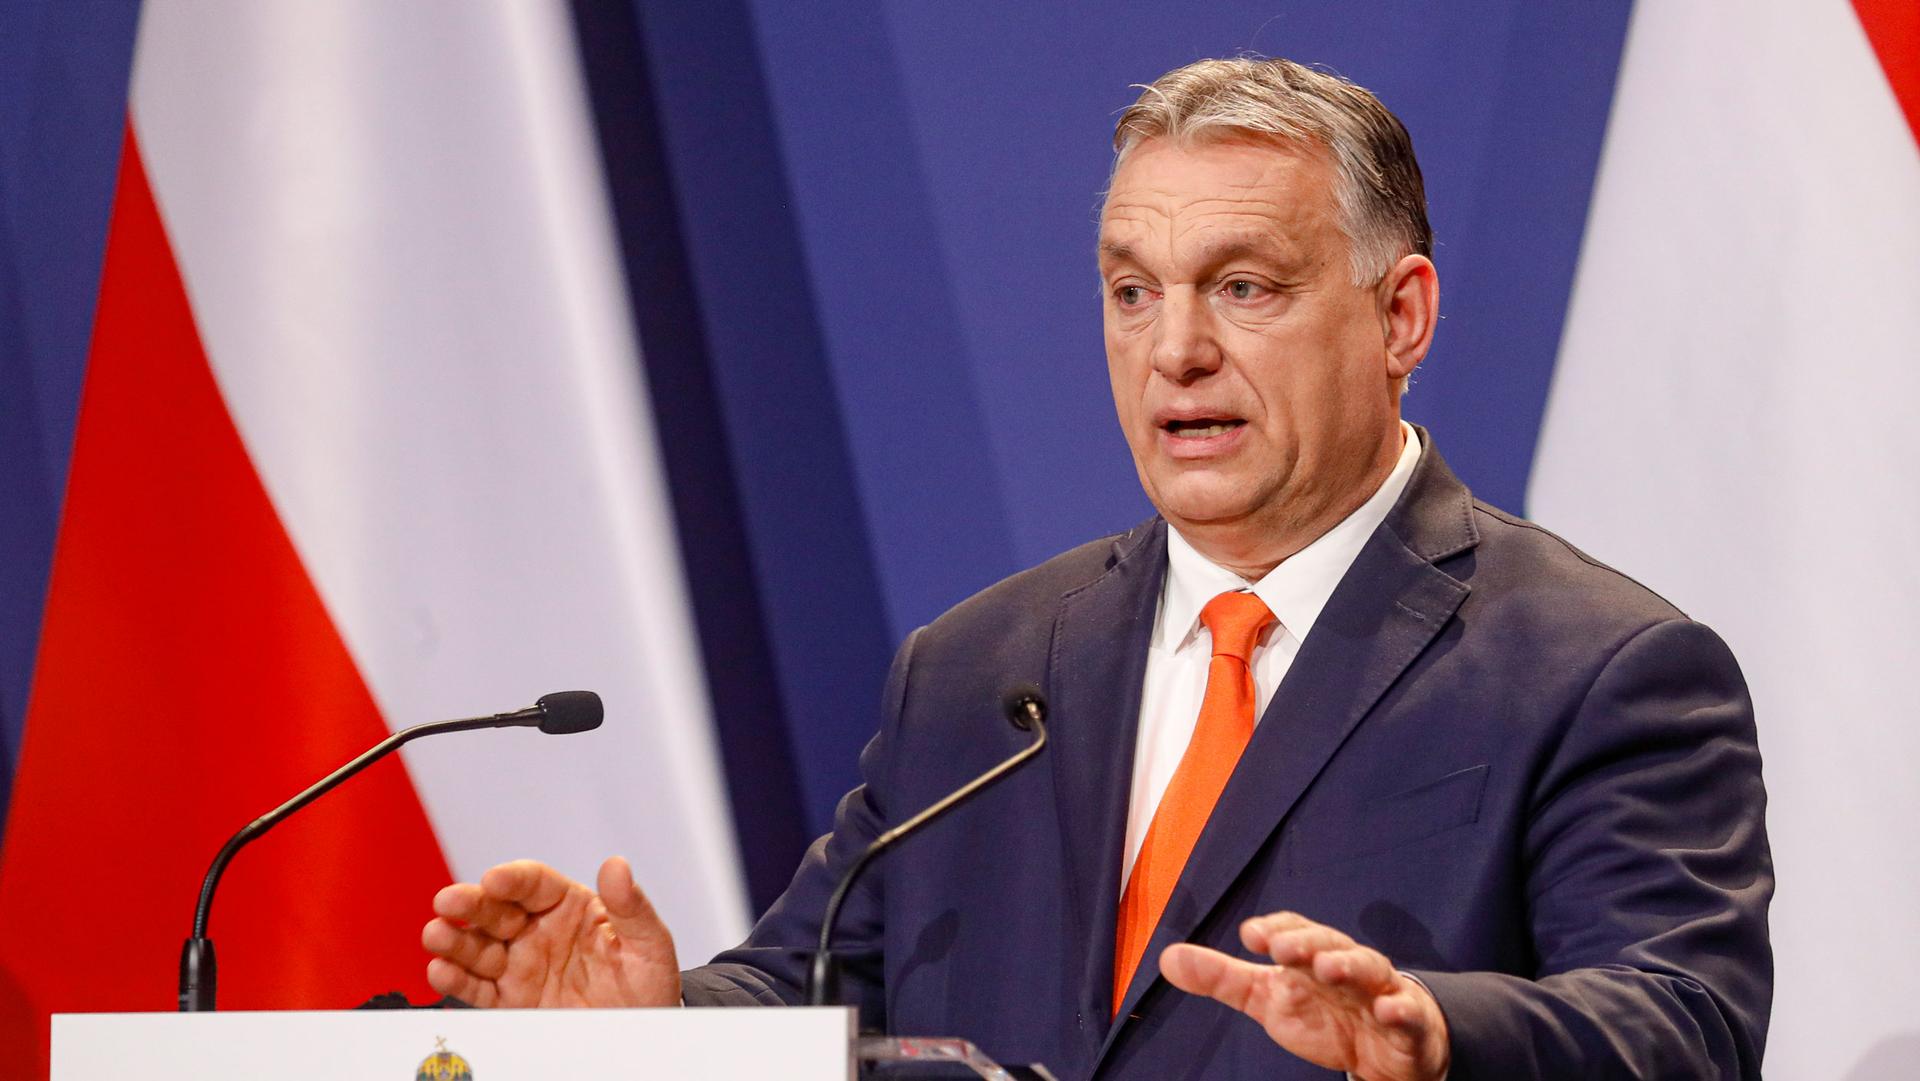 Hungarian Prime Minister Viktor Orban is shown wearing a blue suit and orange tie while speaking at a podium with two microphones.